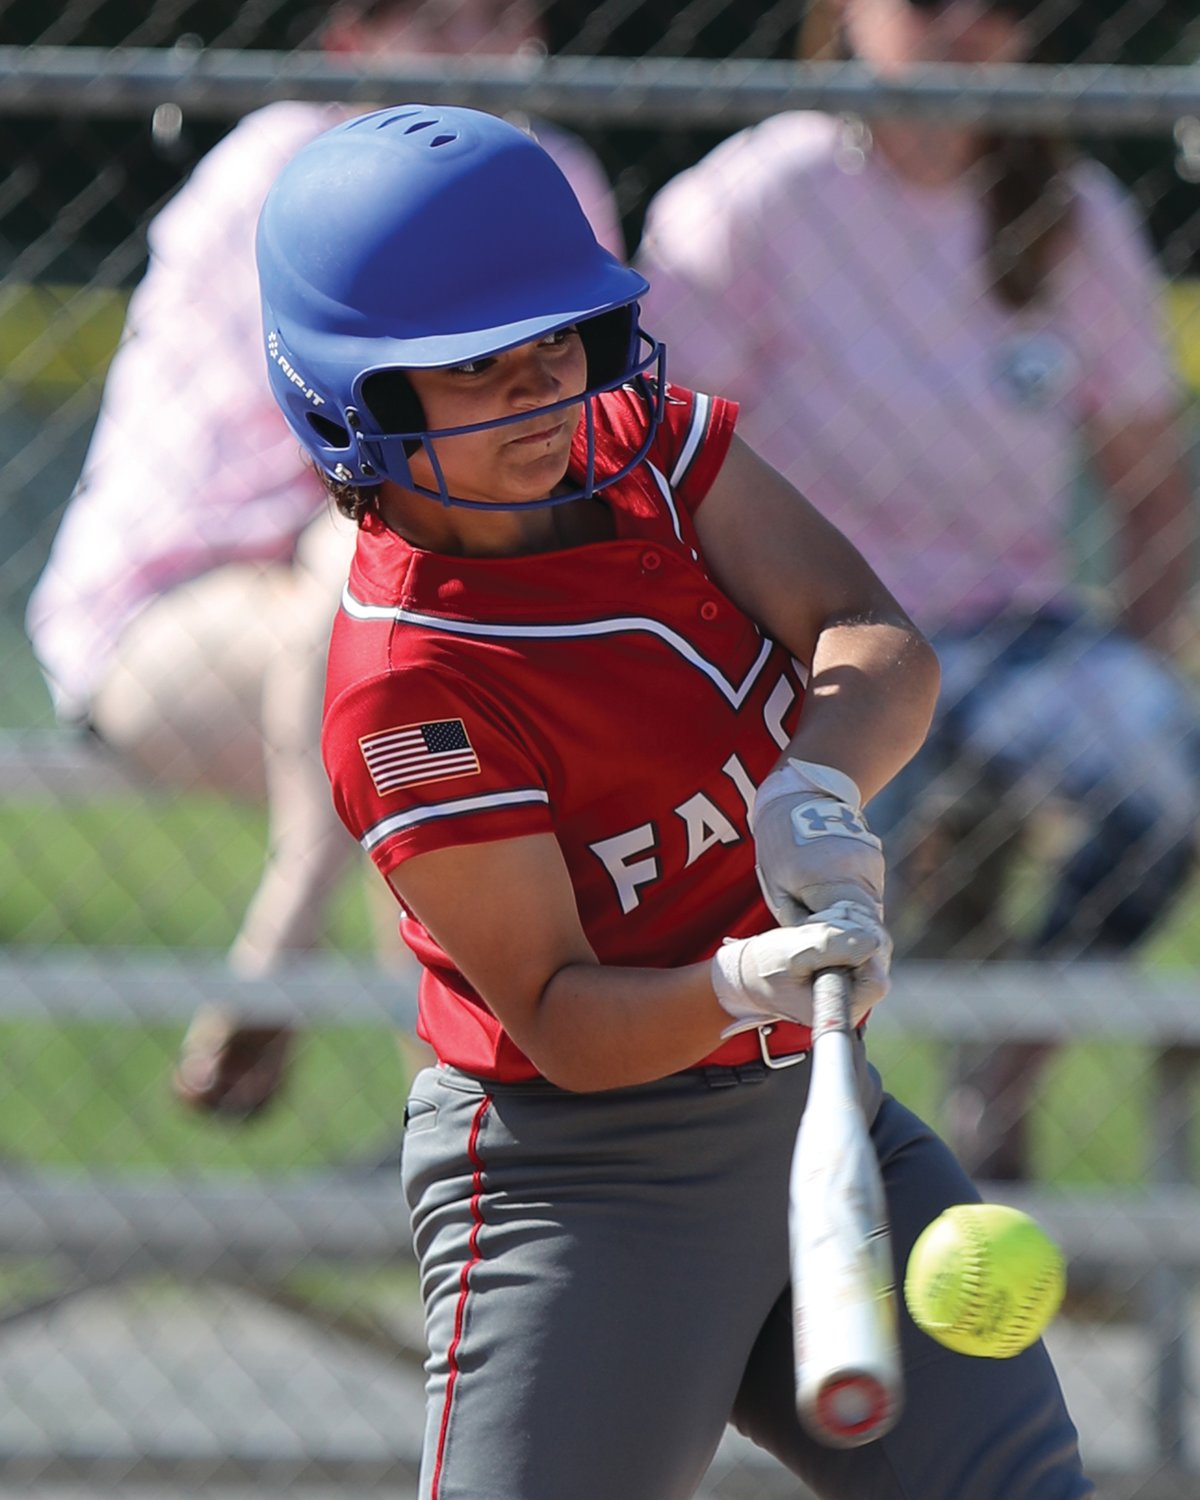 AT THE DISH: Cranston West’s Cadence Koenig takes a swing against La Salle. (Photos by Mike Zawistoski)